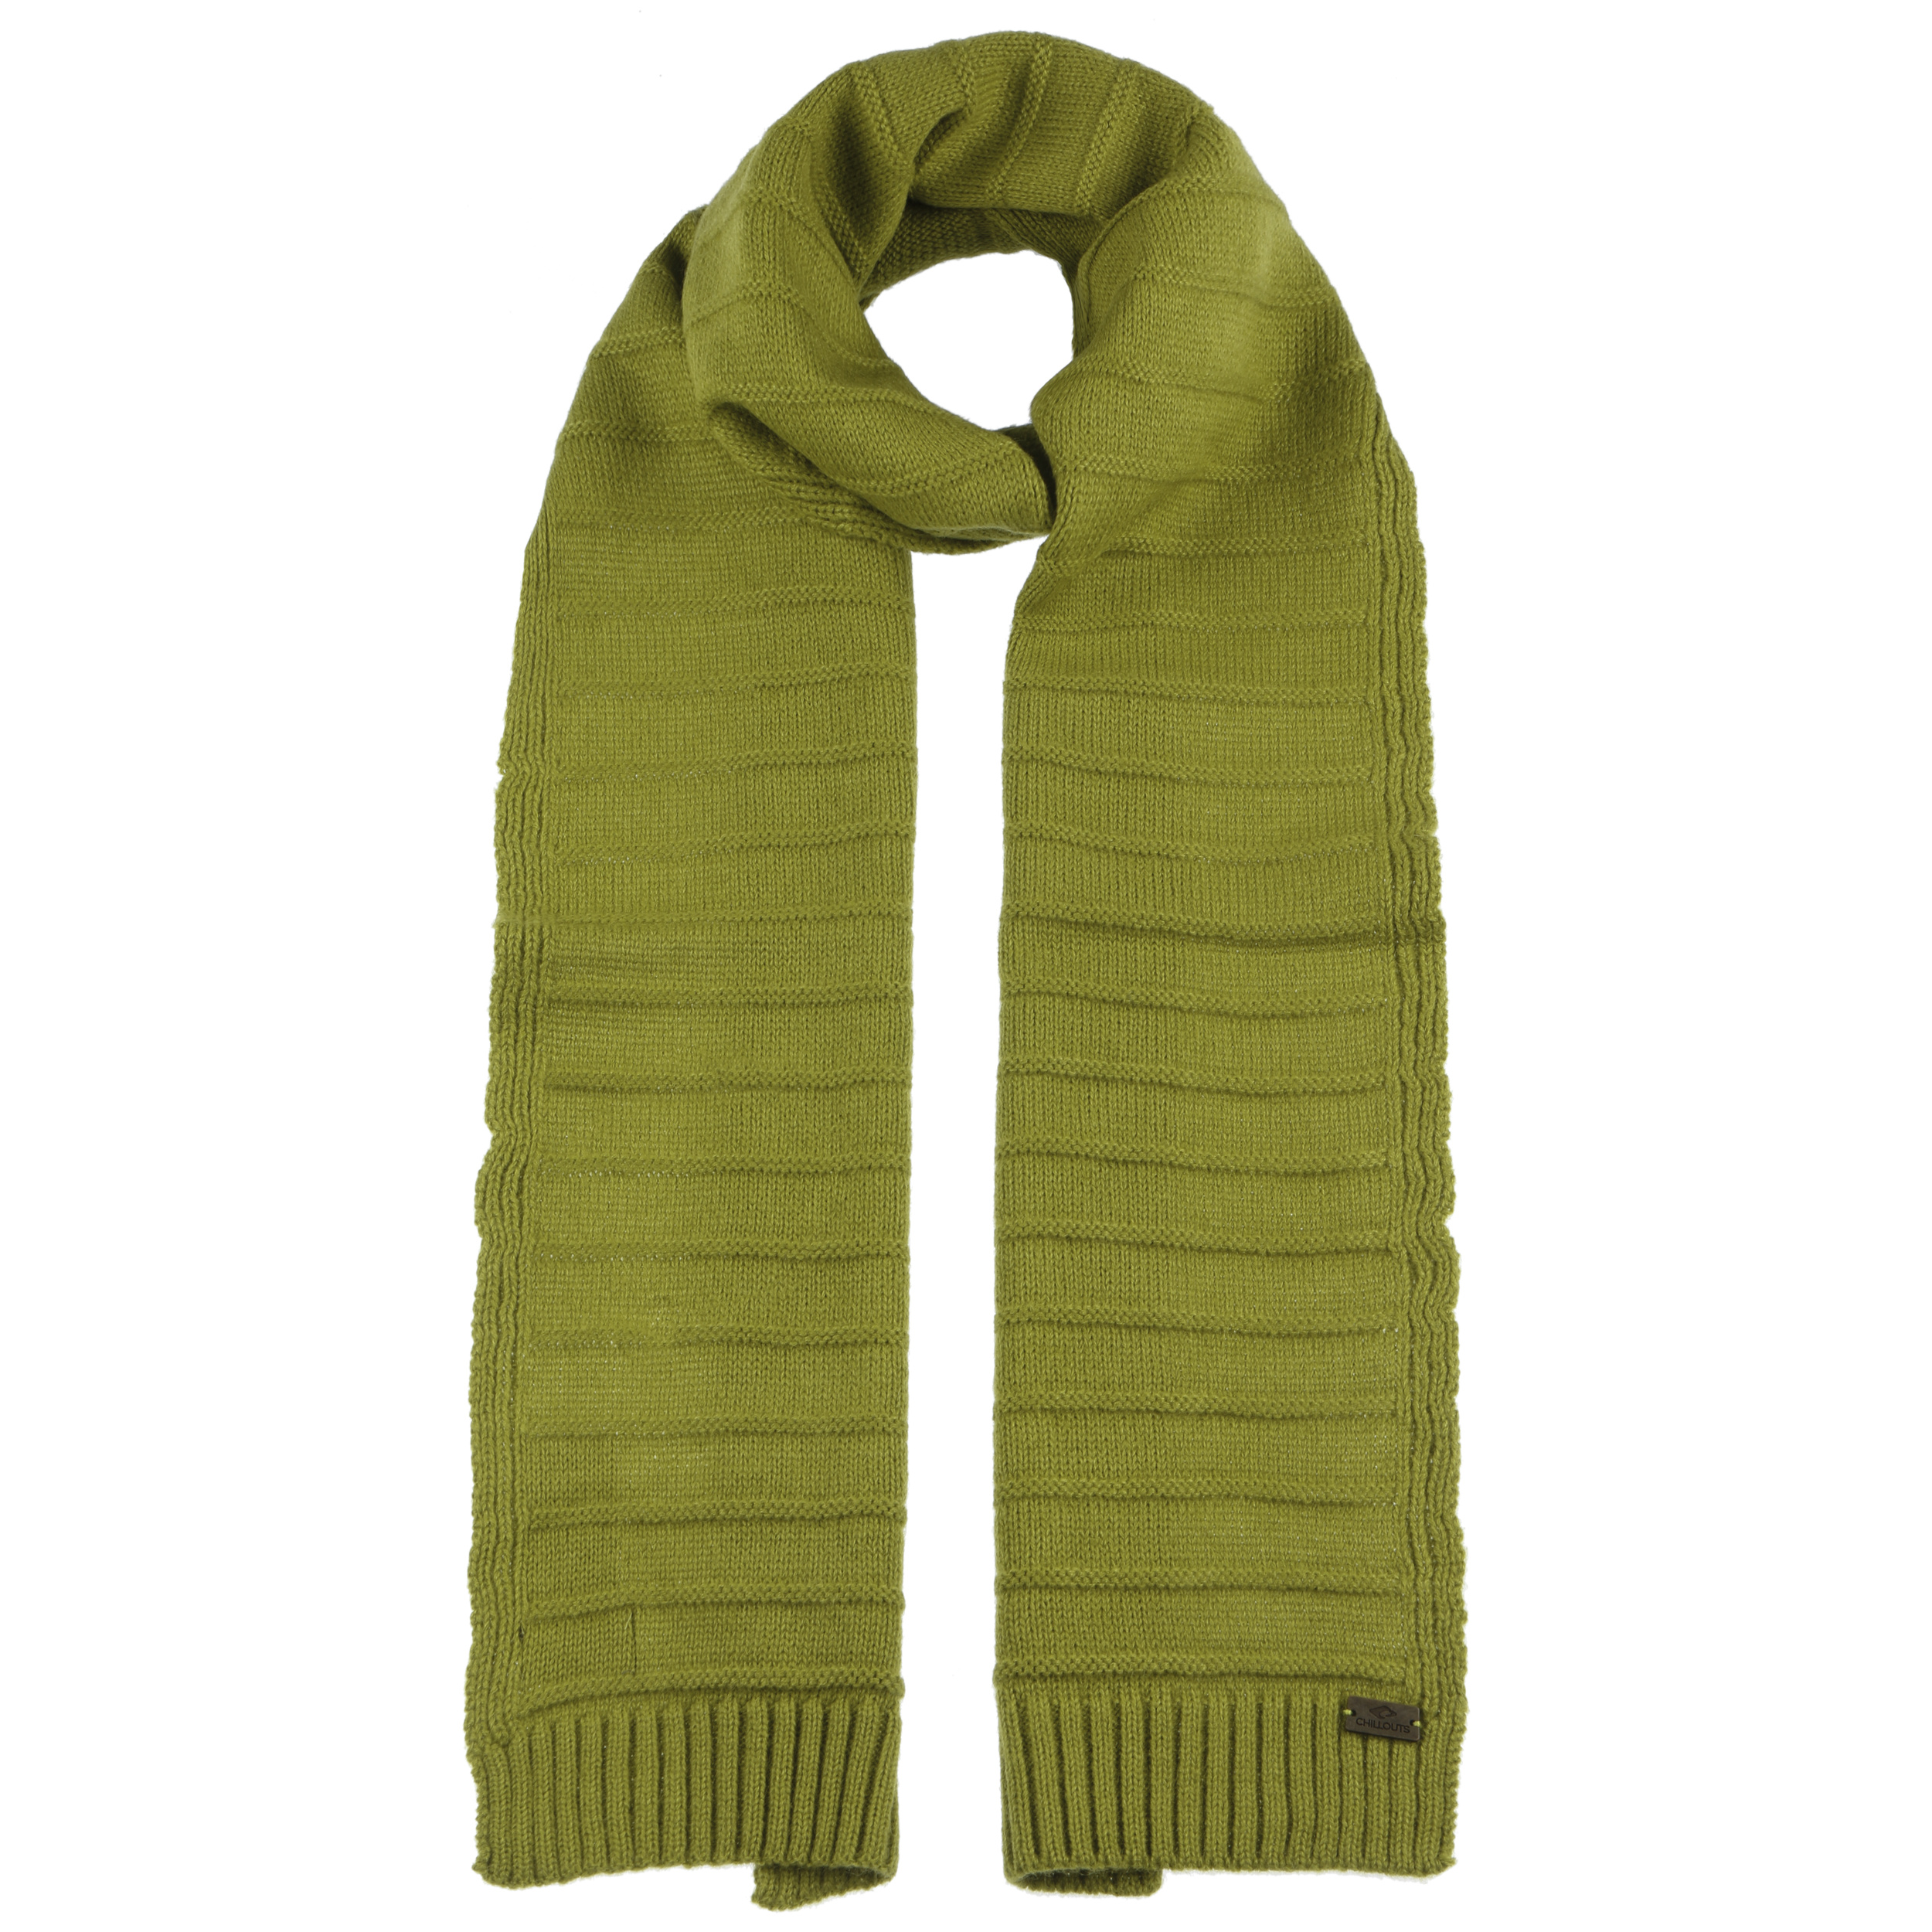 Strickschal by € Arne Chillouts 29,99 -